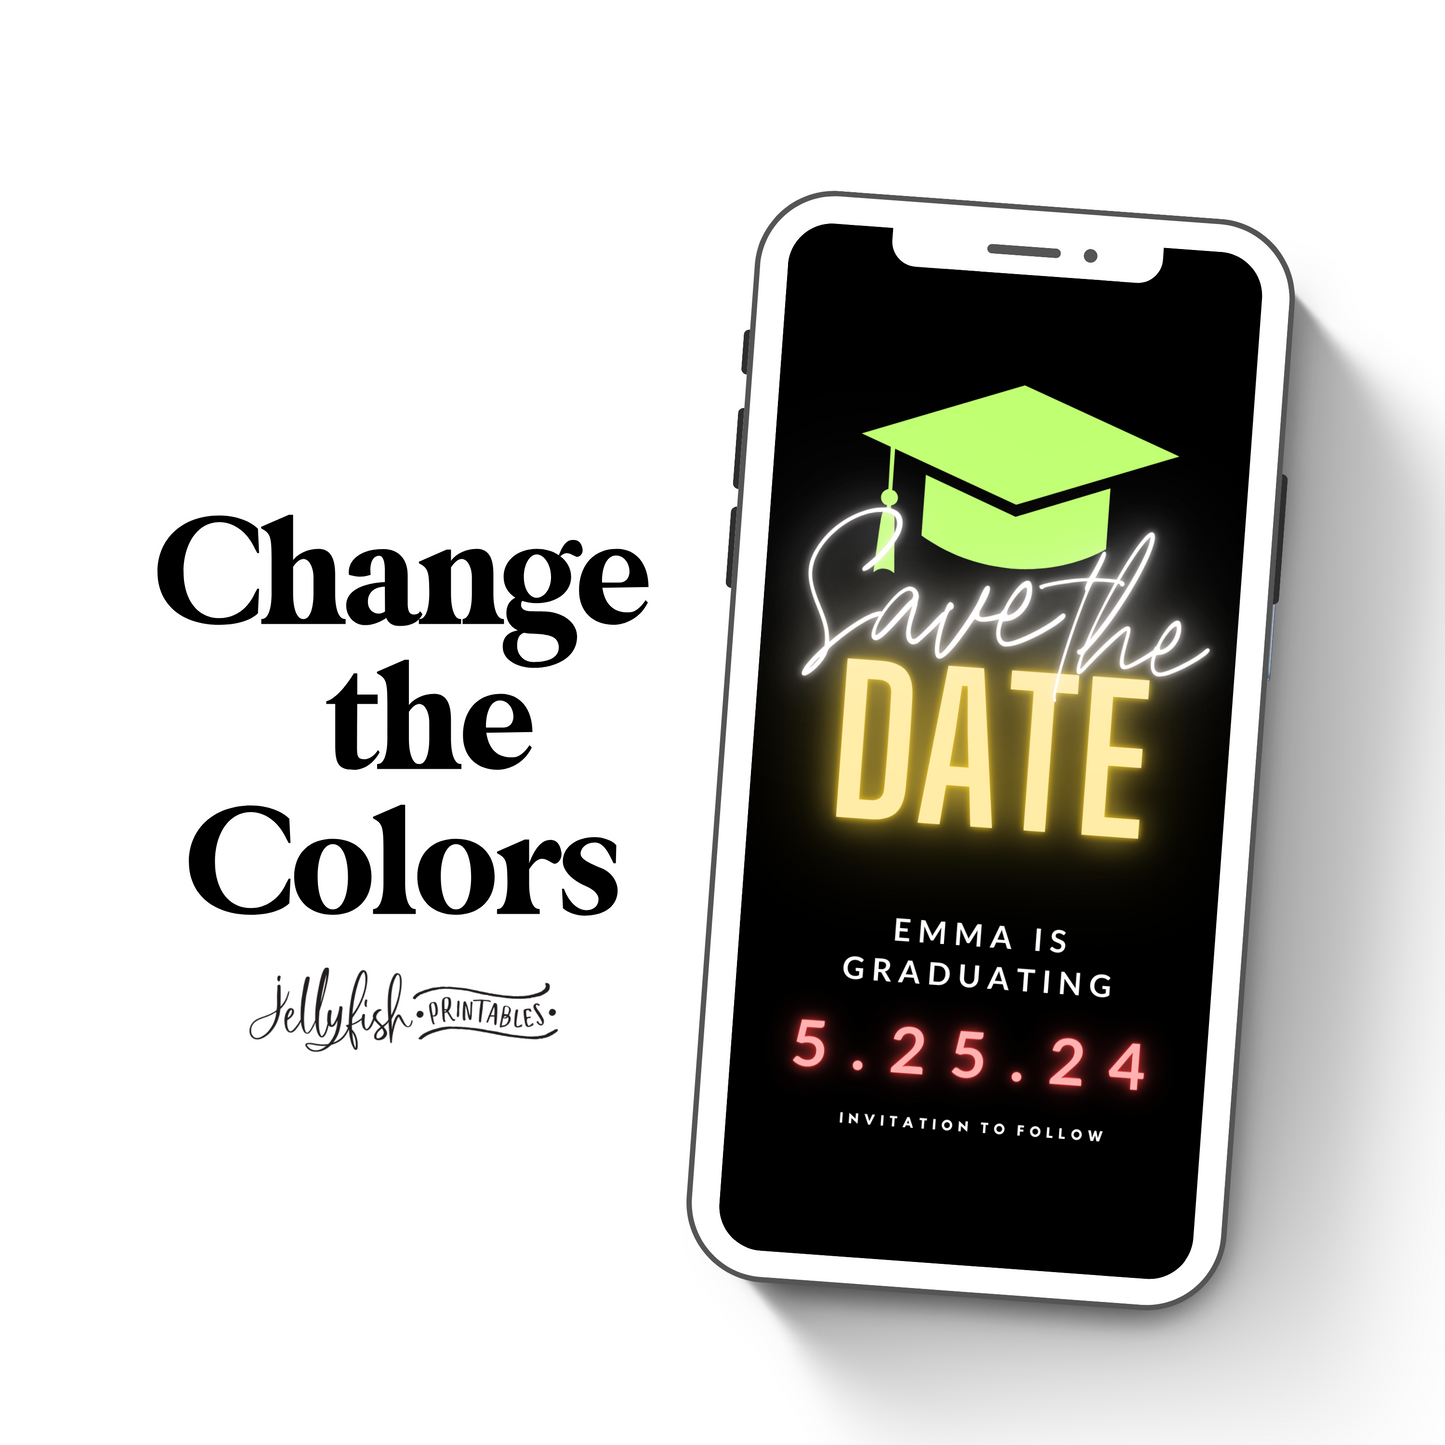 Neon Green Animated Canva Template for texting. Graduation Save the date. Send it out today!